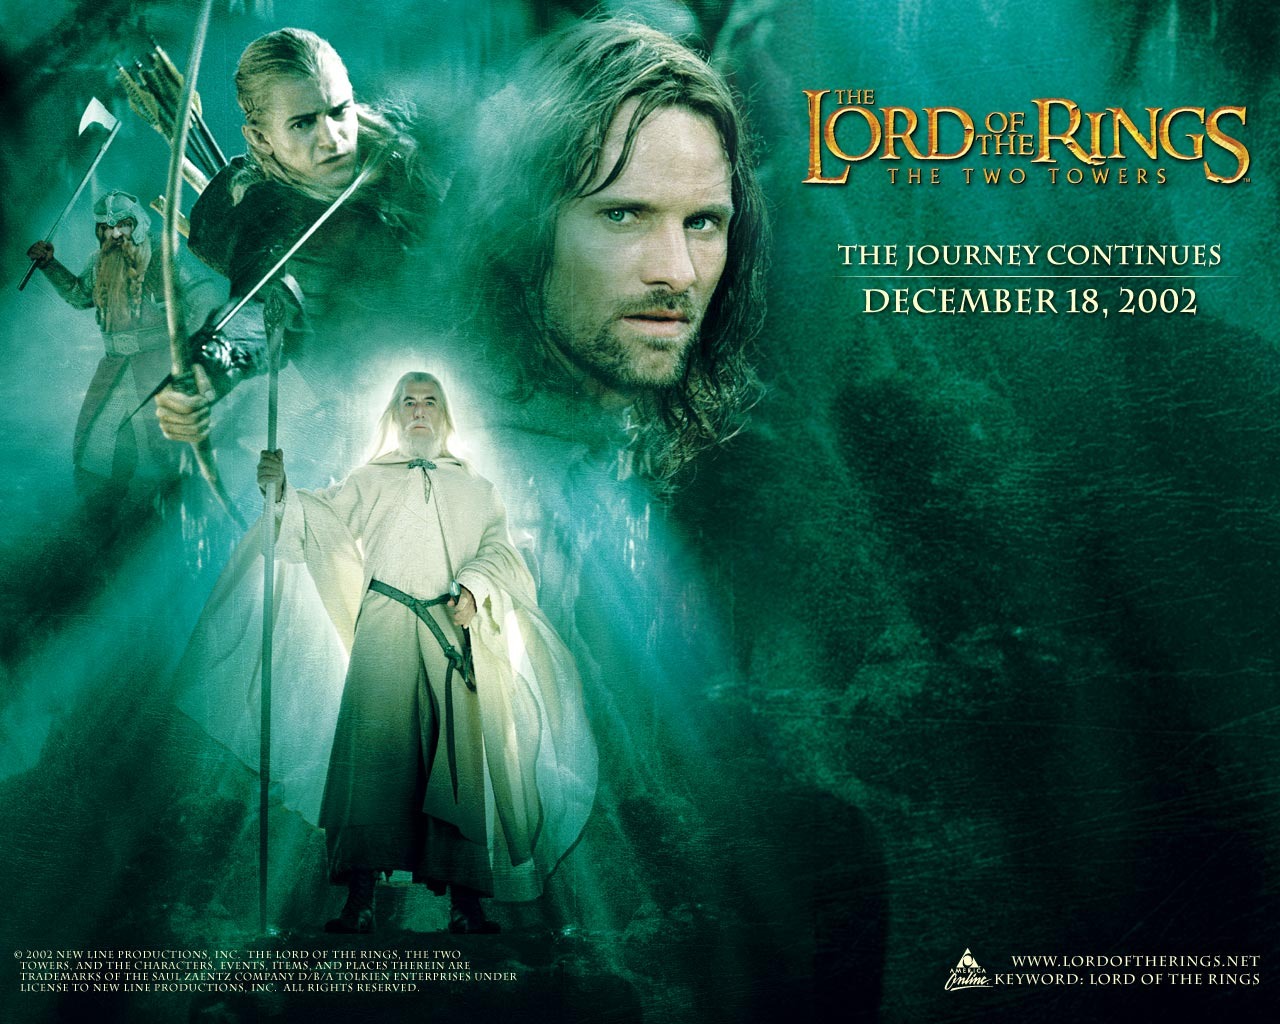 The Lord of the Rings wallpaper #4 - 1280x1024